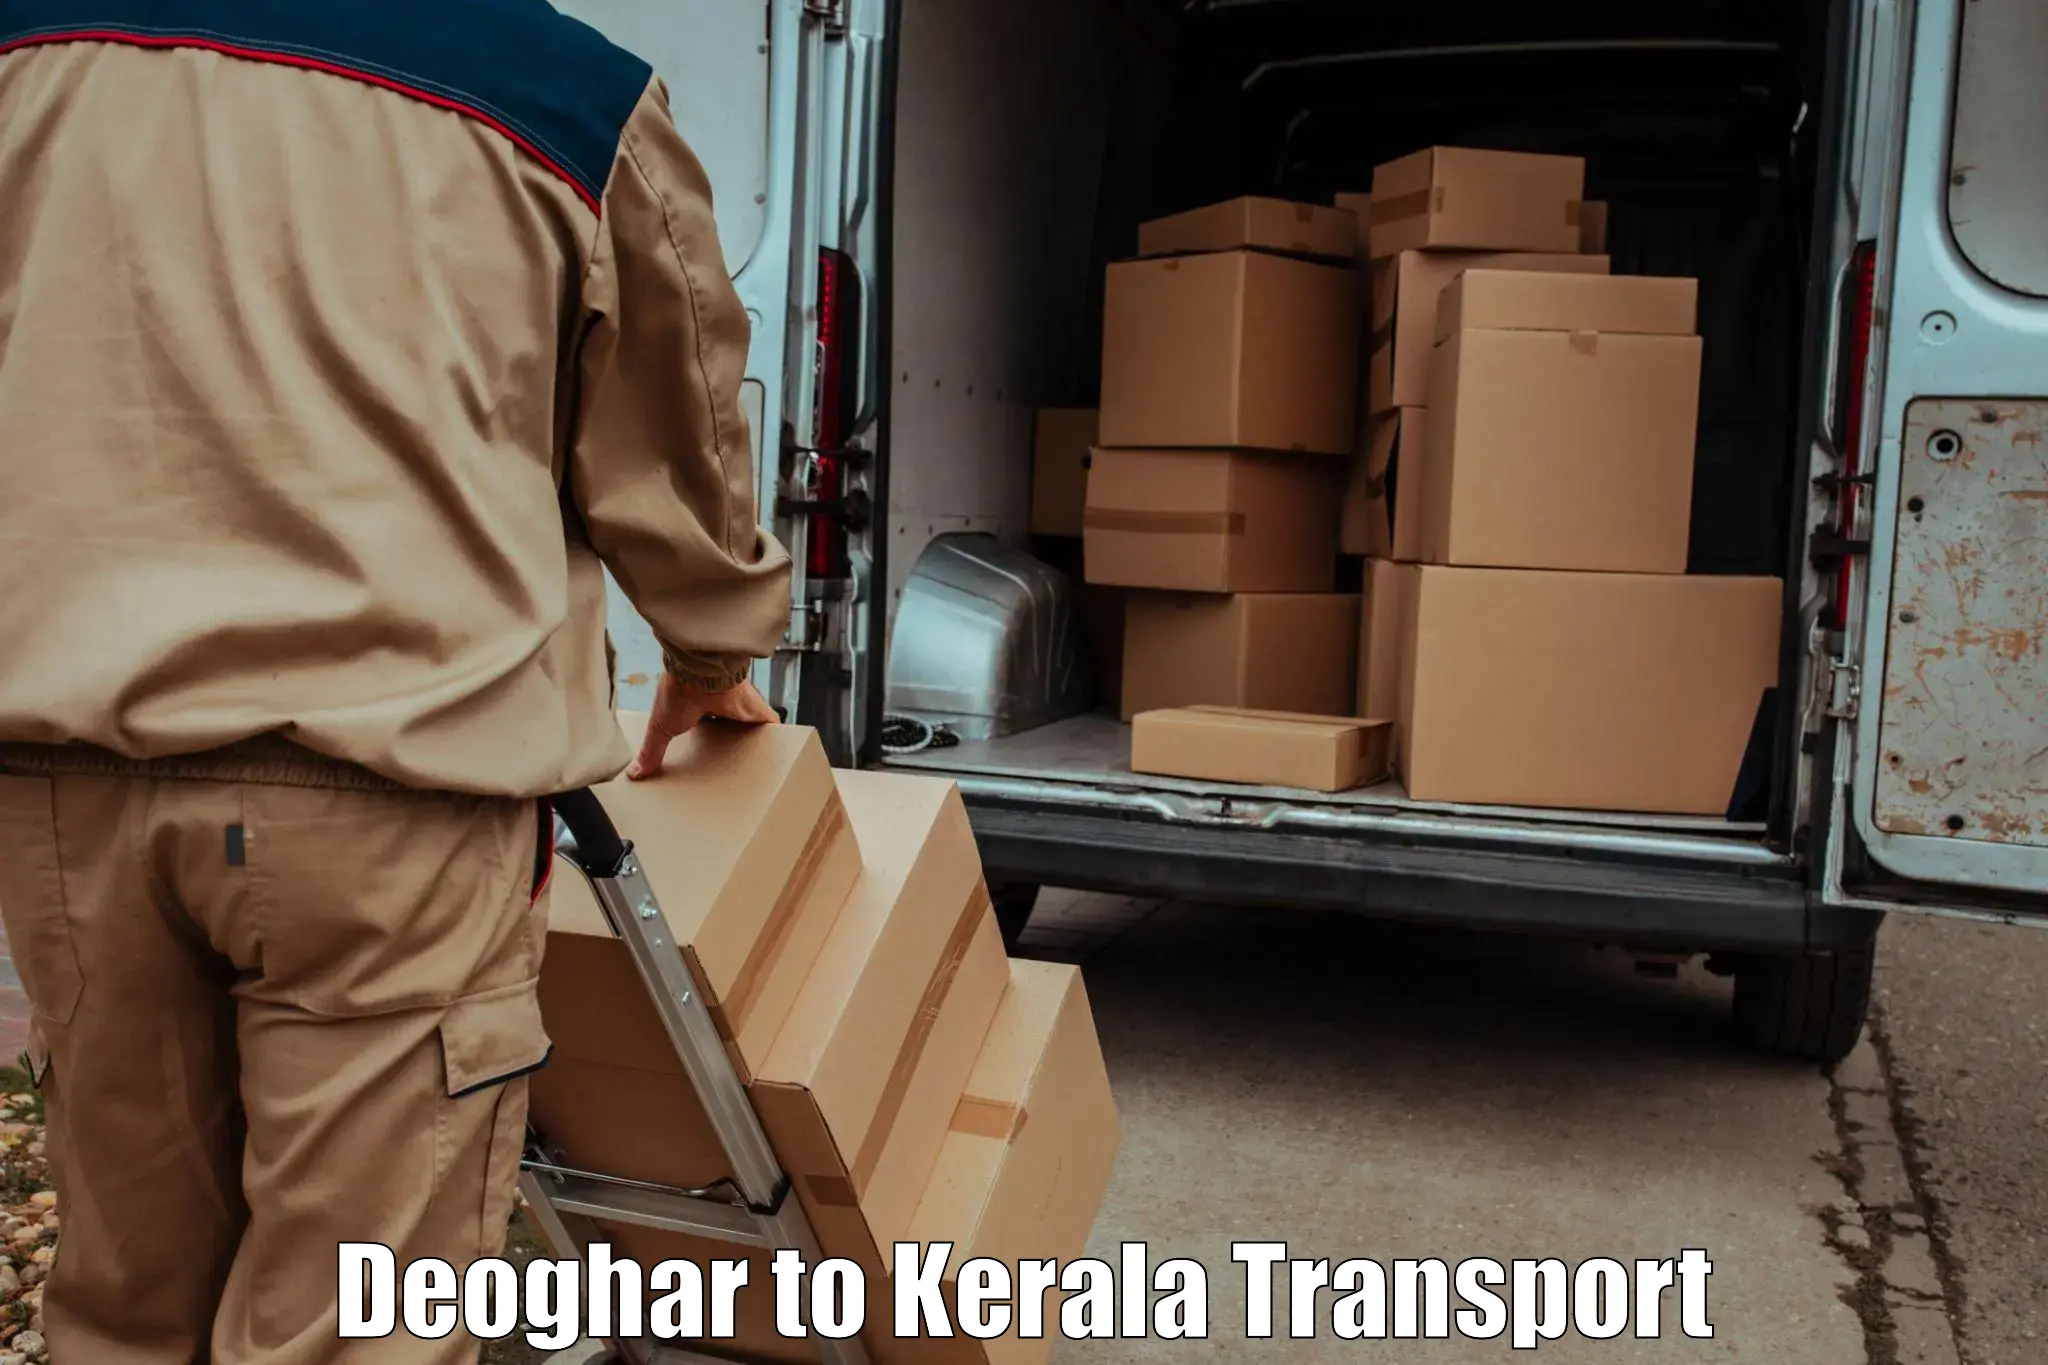 Nearby transport service Deoghar to Puthukkad